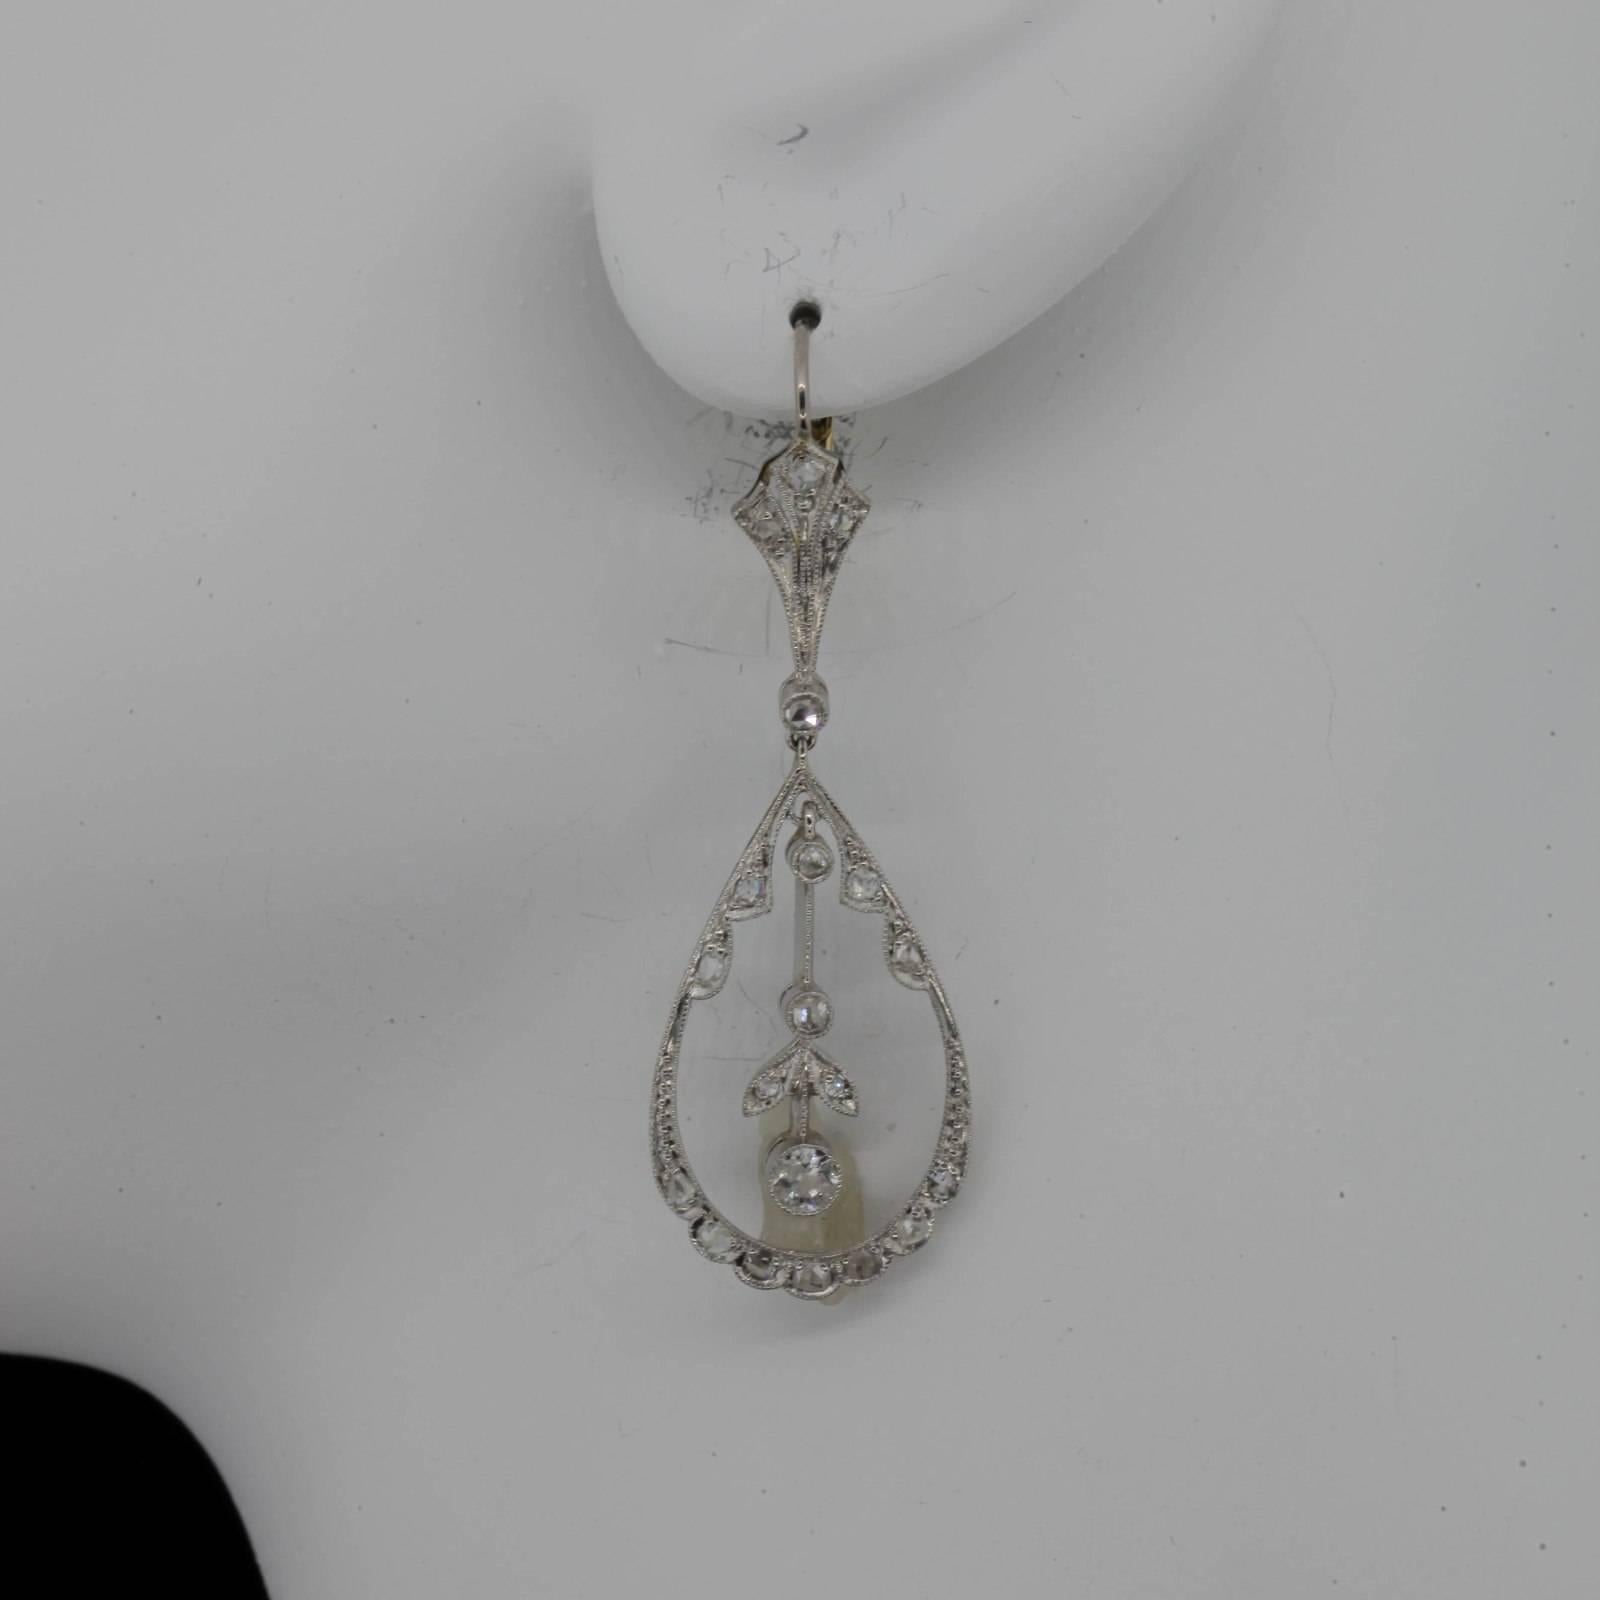 These pretty Deco style dangling earrings are fabricated in platinum and 18KT yellow gold.  The open work pear shape earrings are accented with 0.72 carat of Rose Cut Diamonds and are set with lever backs; they dangle  1 3/4